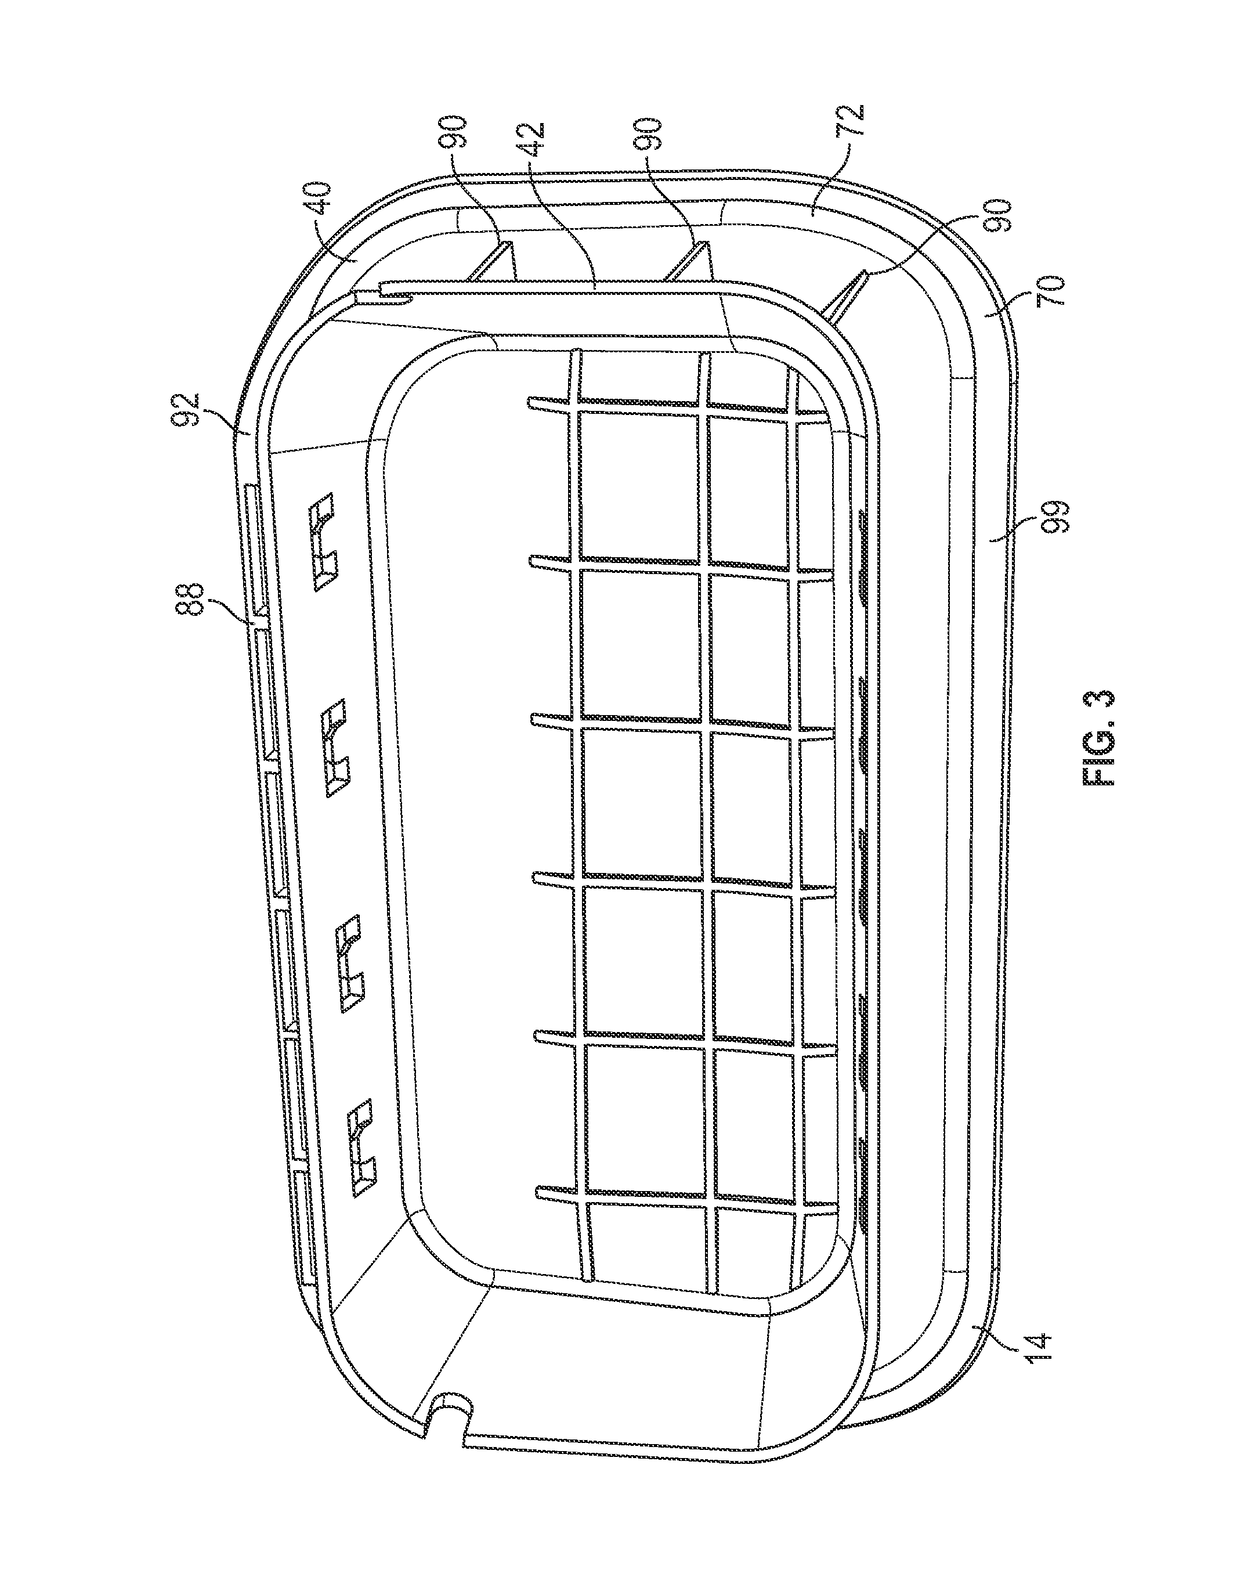 Foam-in-place interior panels having integrated airbag door for motor vehicles and methods for making the same